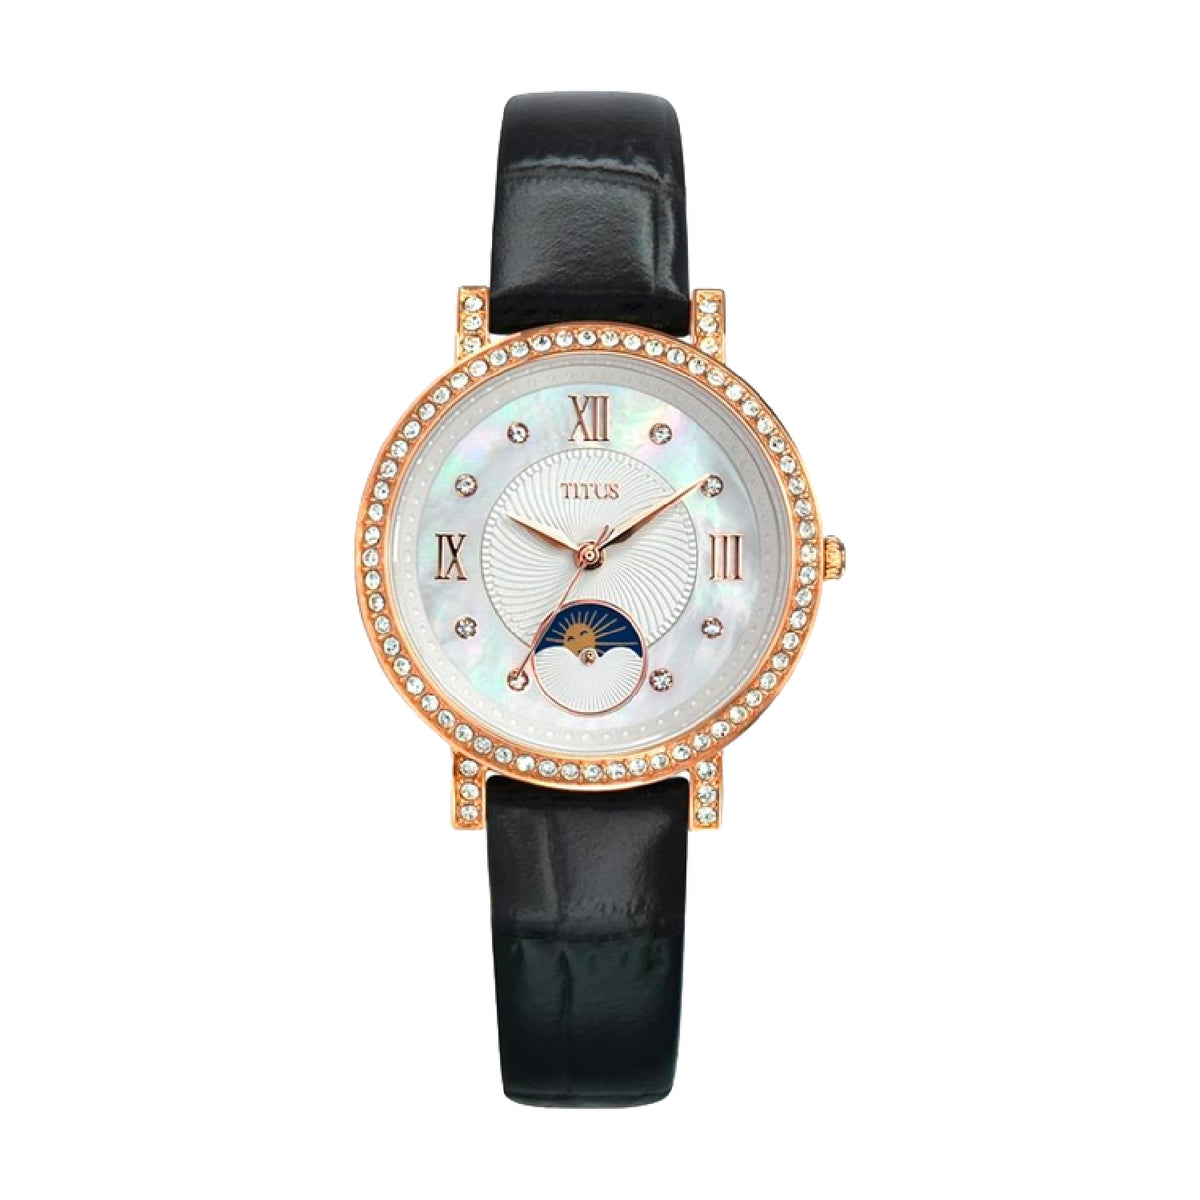 Chandelier 3 Hands with Day Night Indicator Quartz Leather Women Watch W06-03261-003